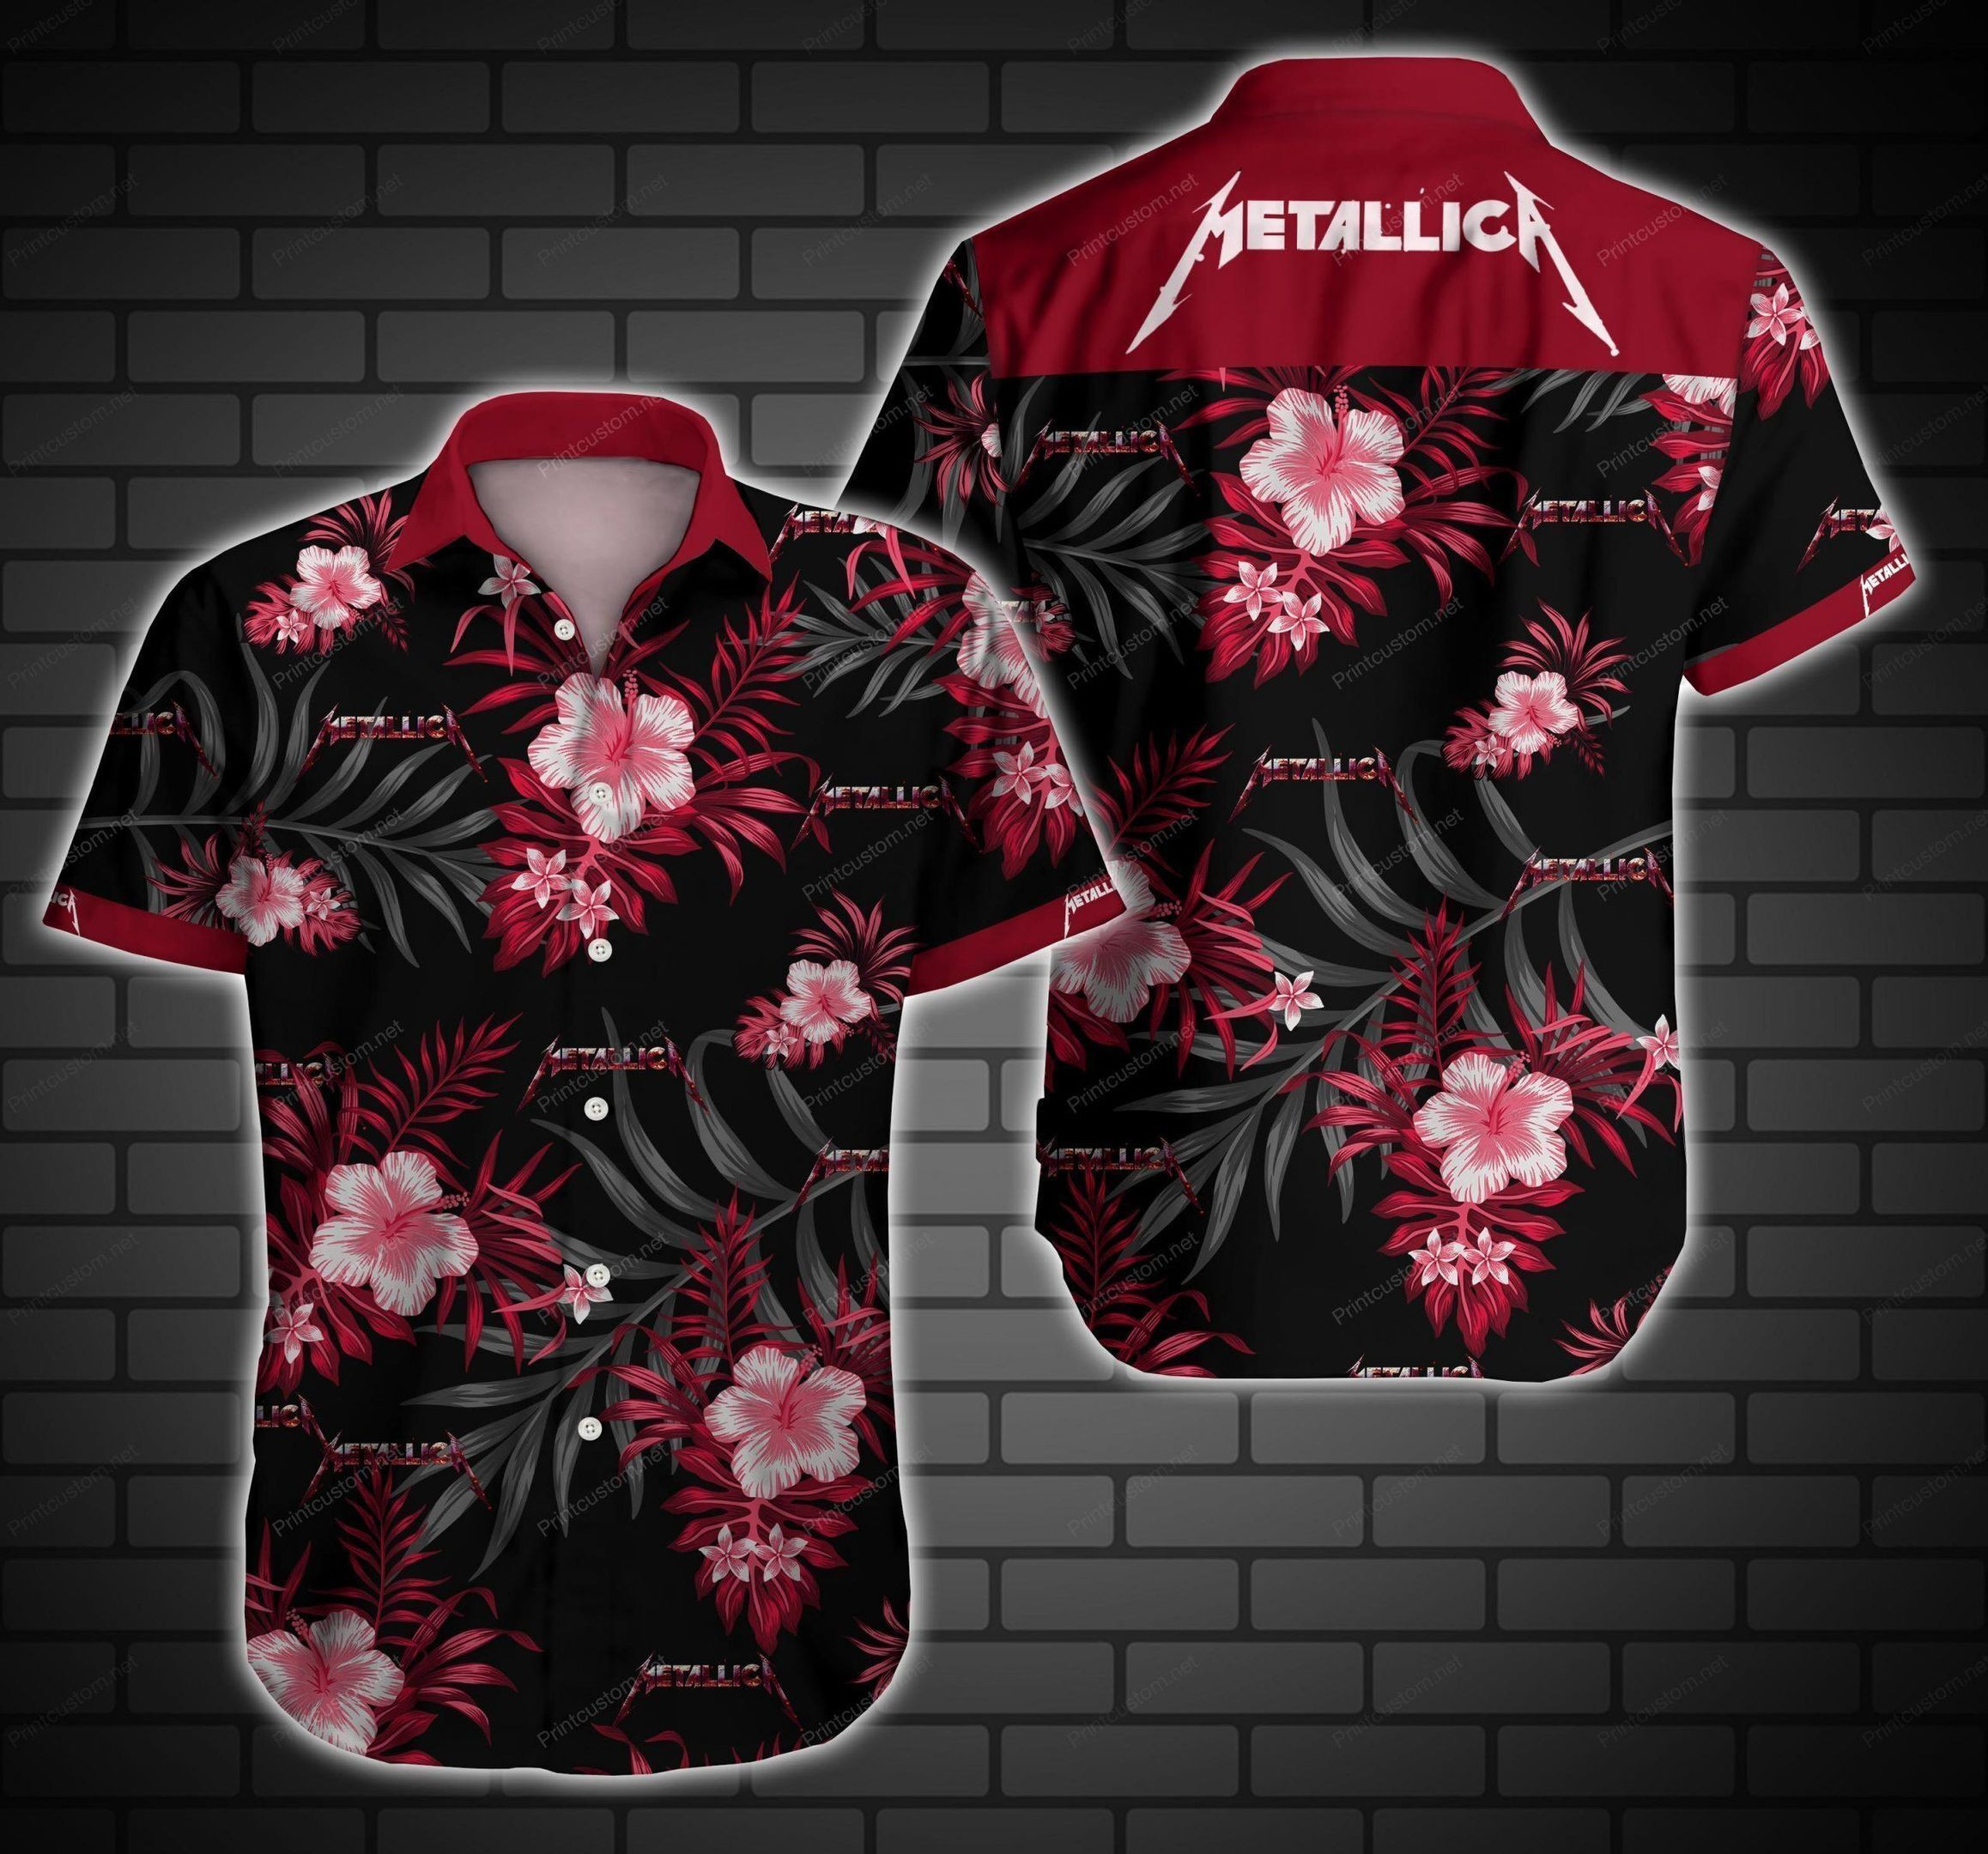 Choose from the many styles and colors to find your favorite Hawaiian Shirt below 234